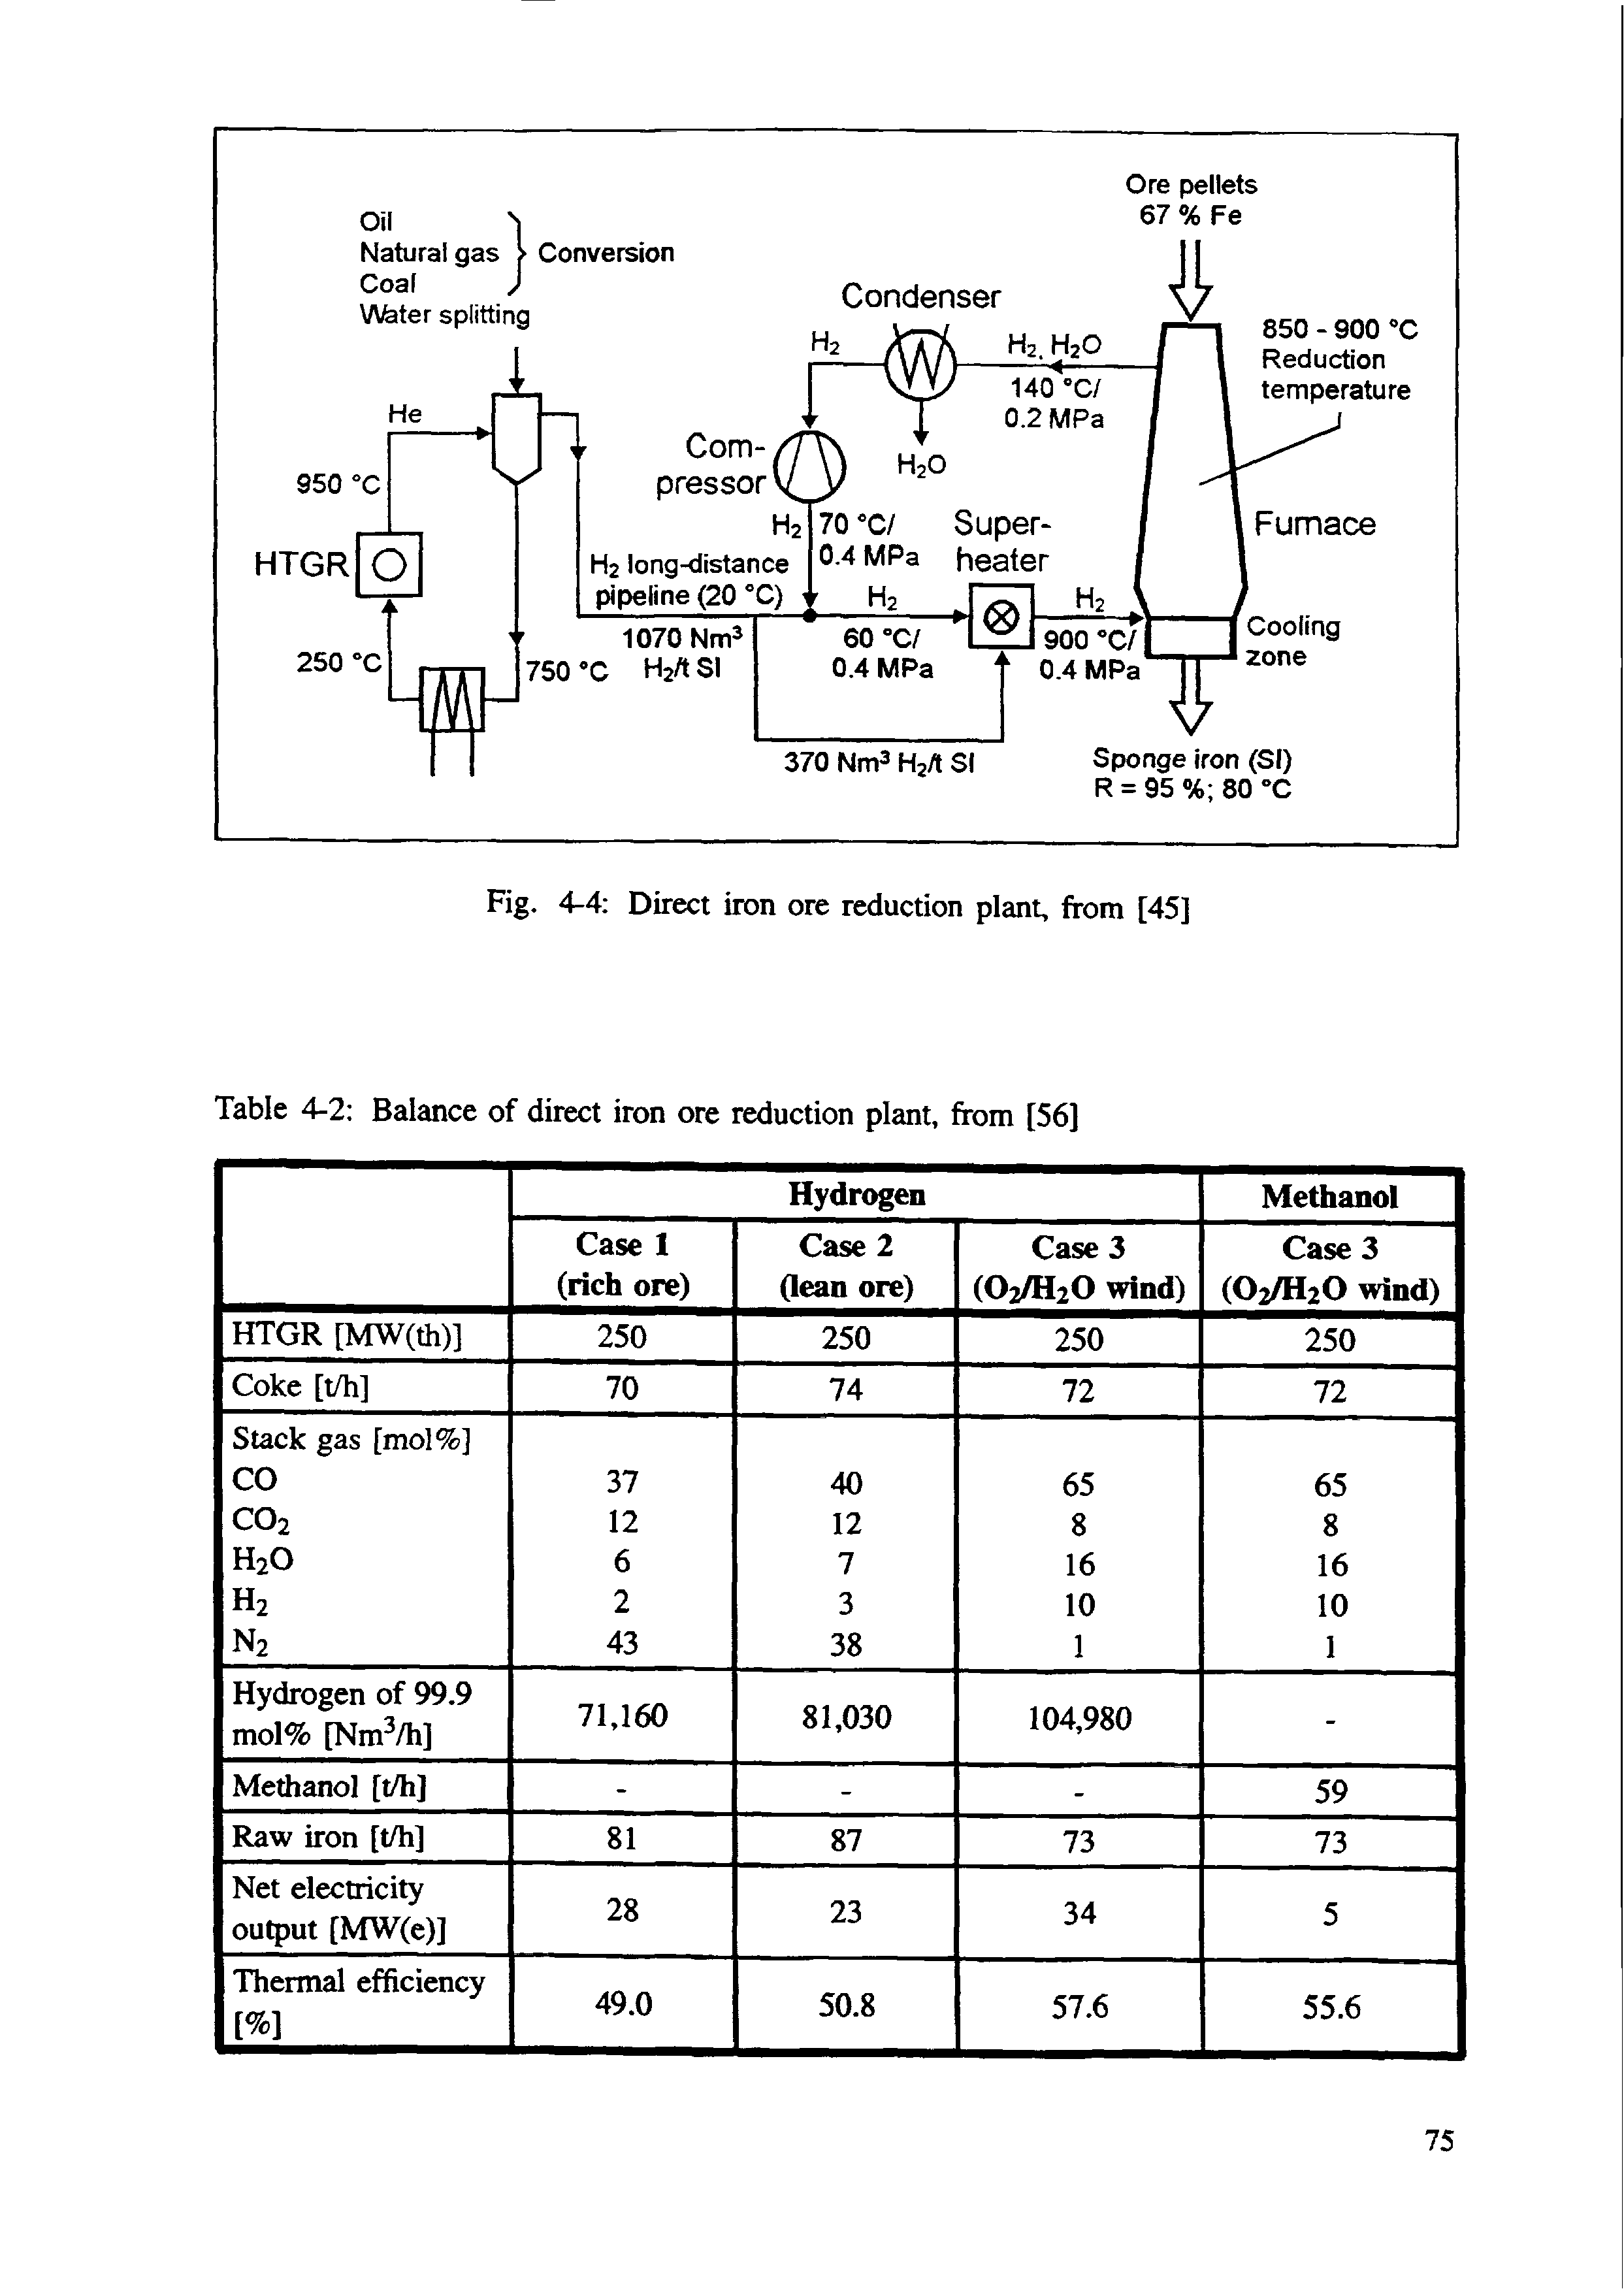 Table 4-2 Balance of direct iron ore reduction plant, from [56]...